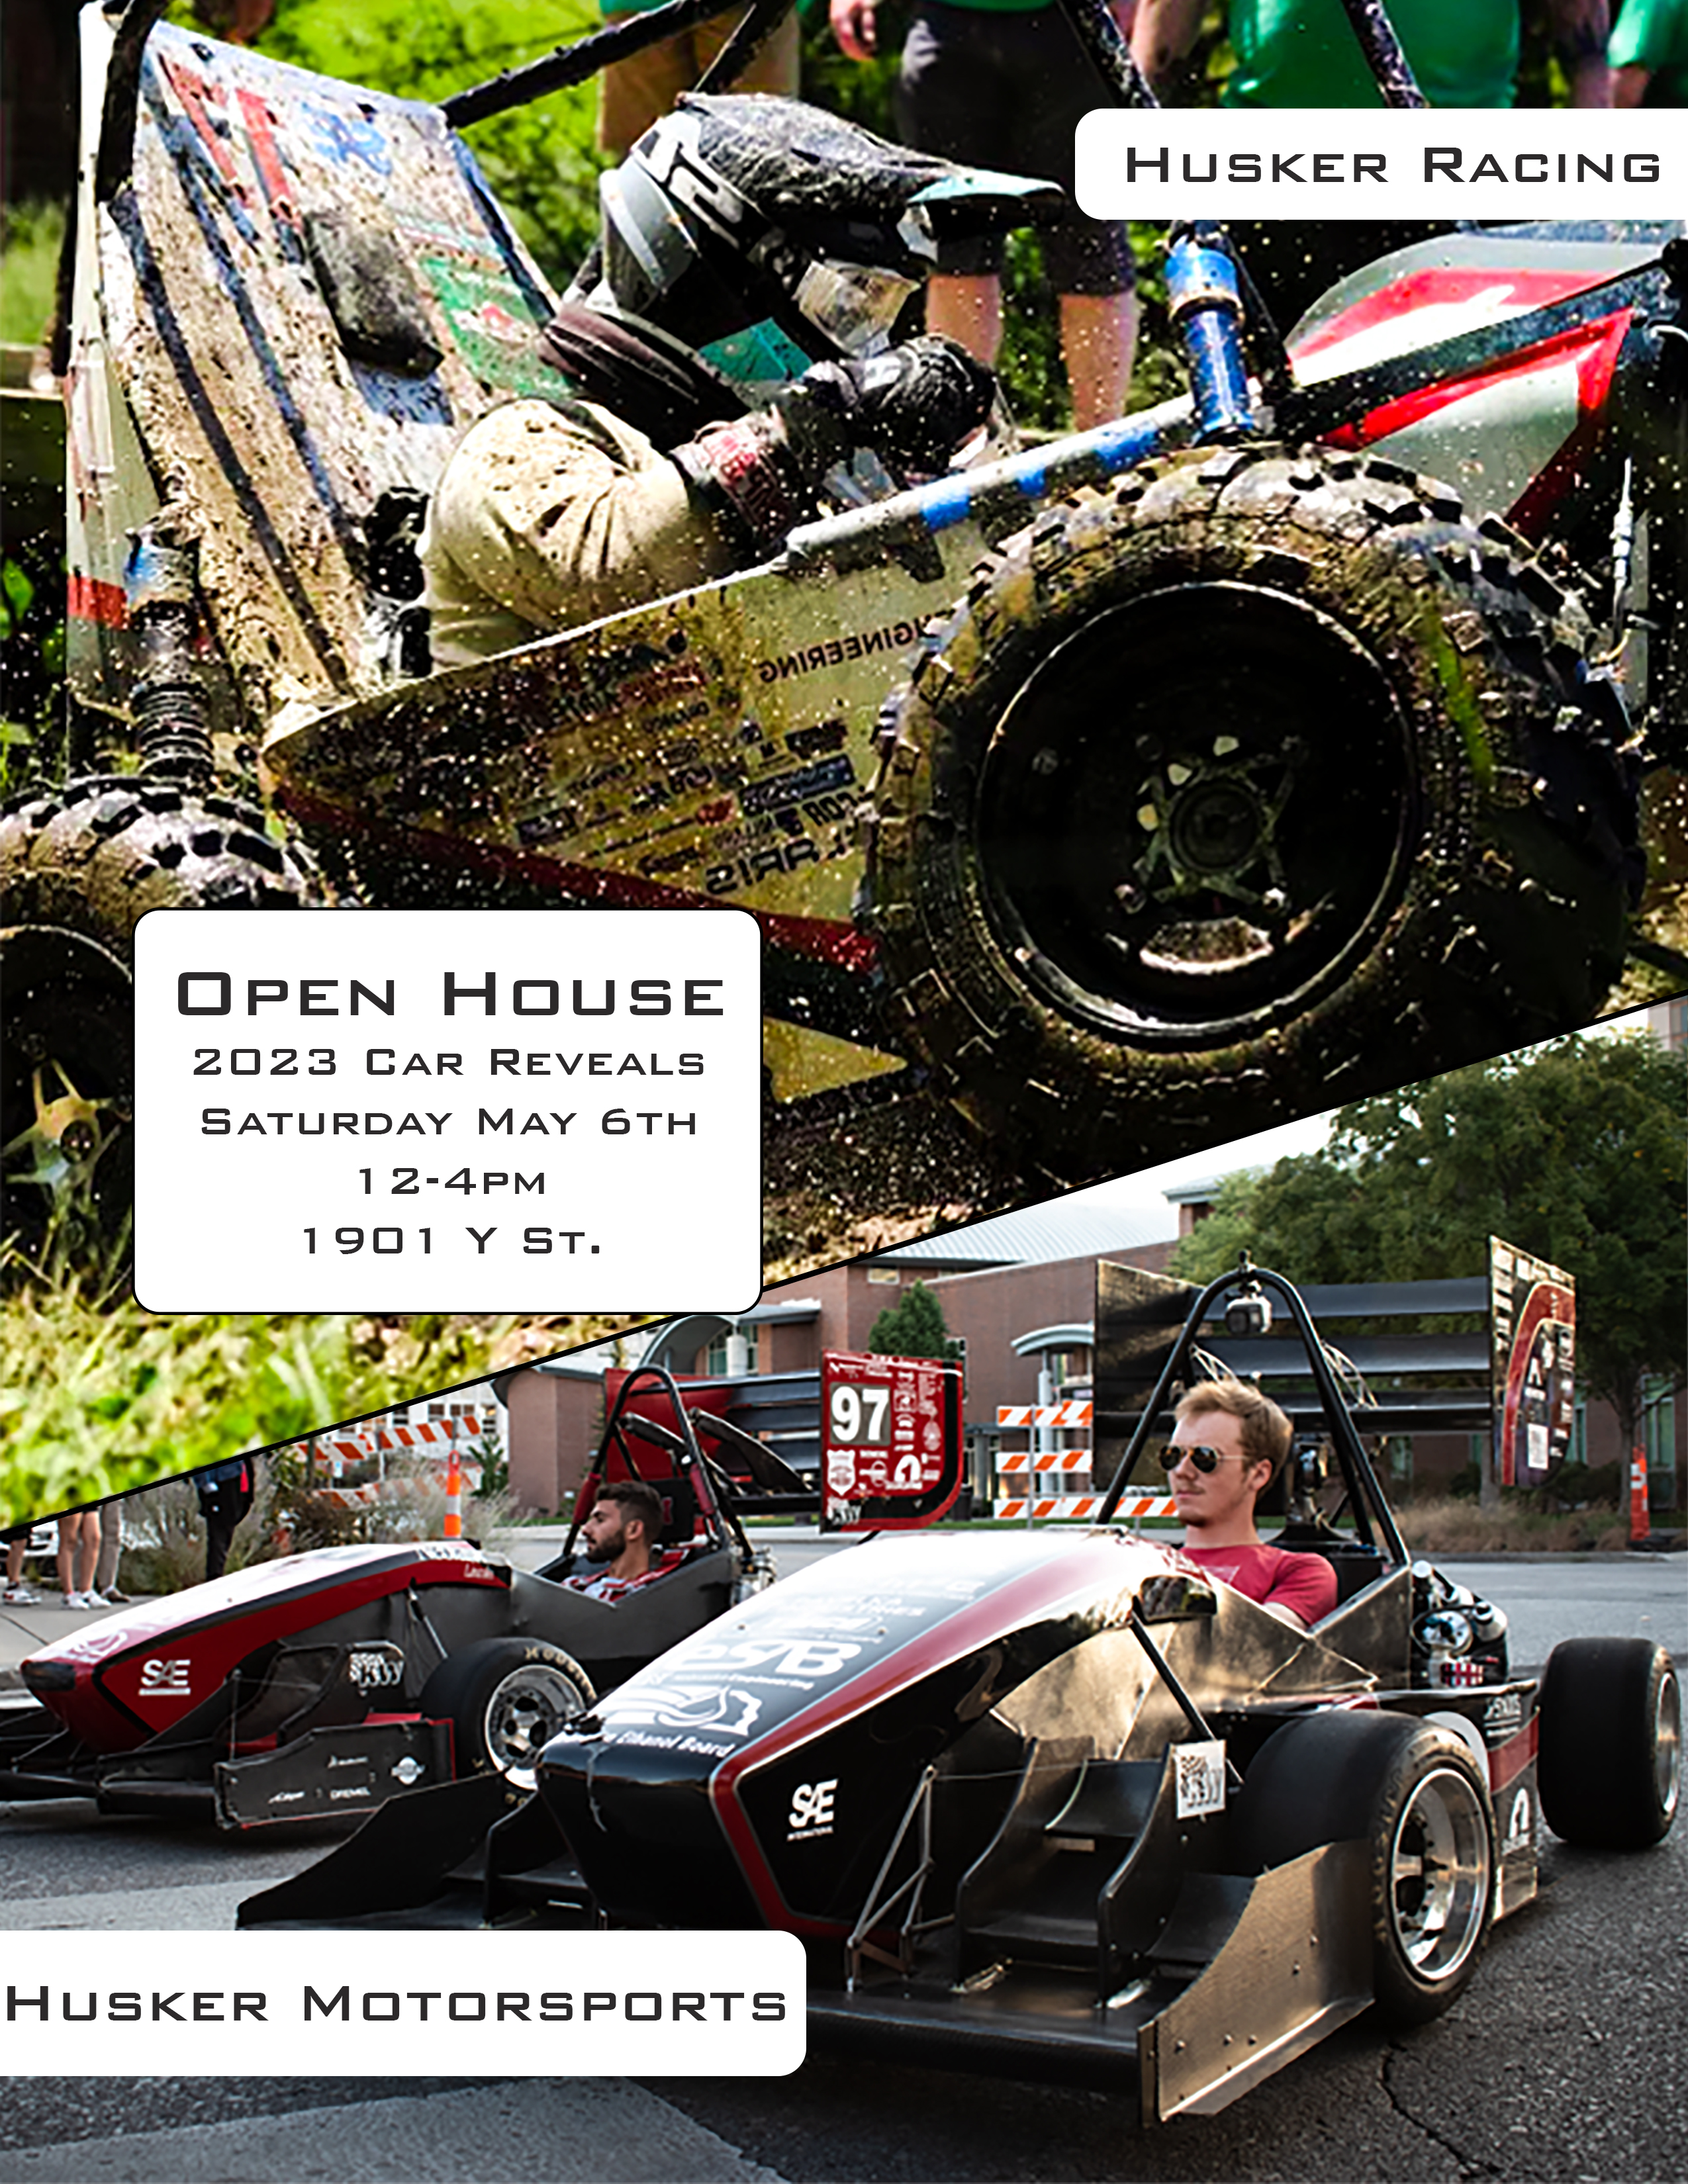 Husker Motorsports and Husker Racing plan open house for Saturday, May 6.